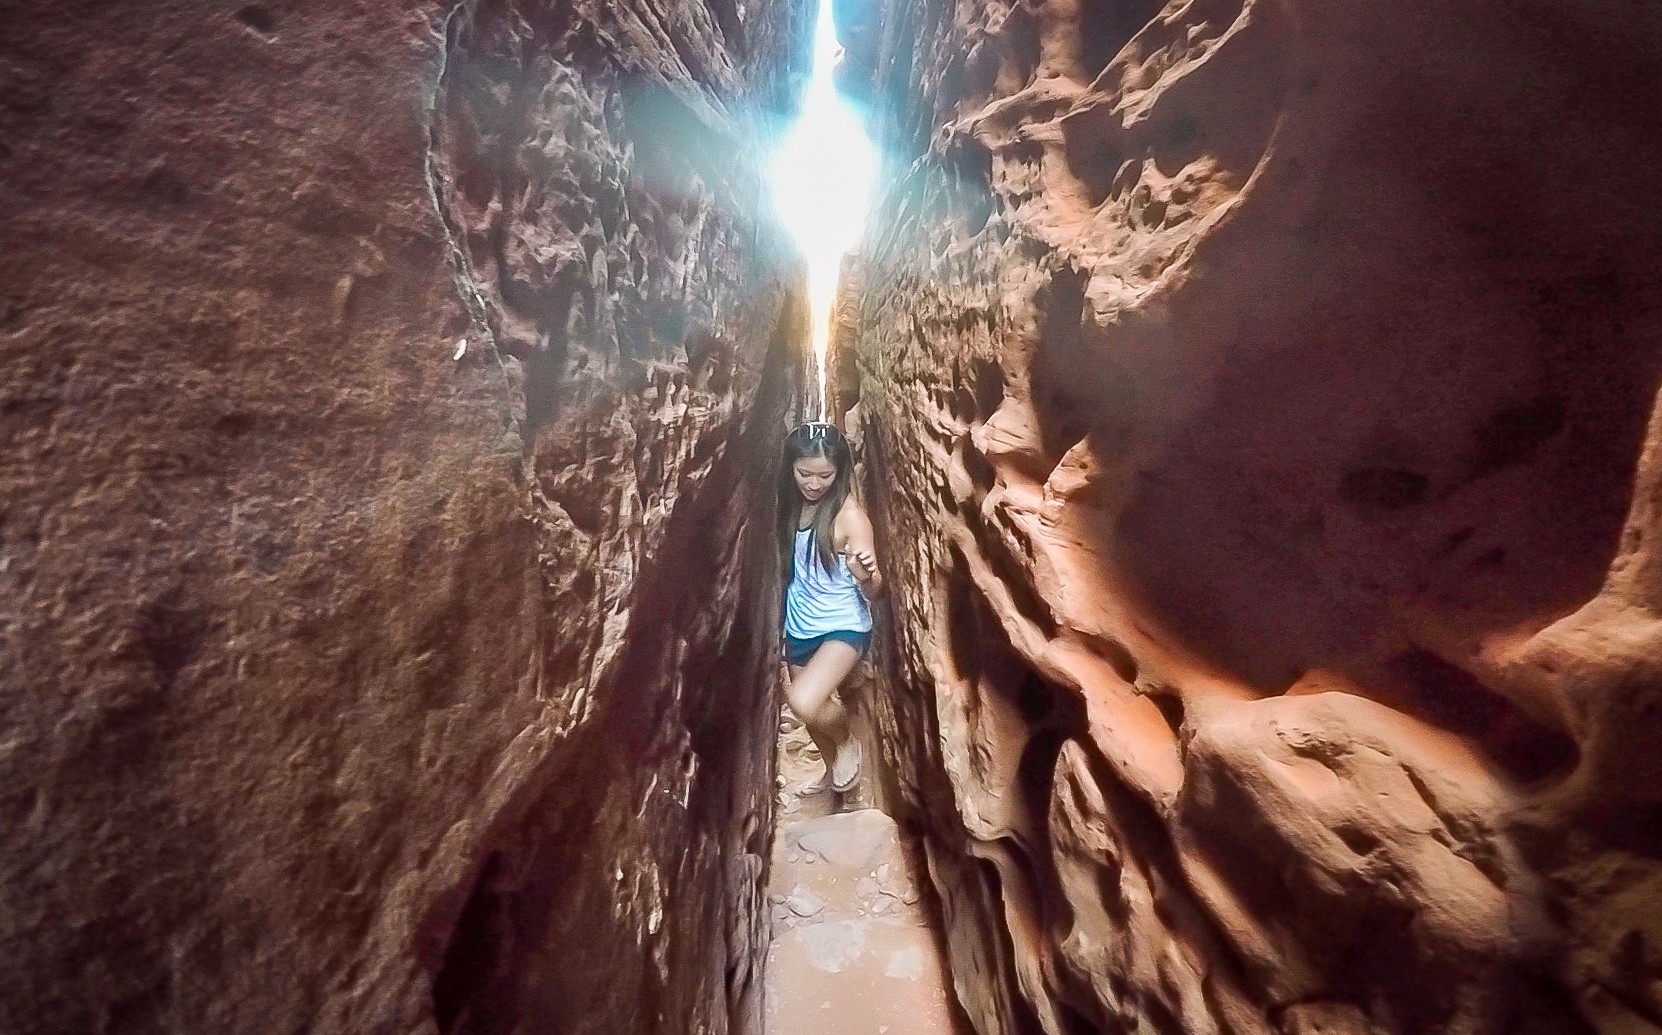 St. George Slot Canyon - Pioneer Park, St. George, UT - Backcountrycow ...